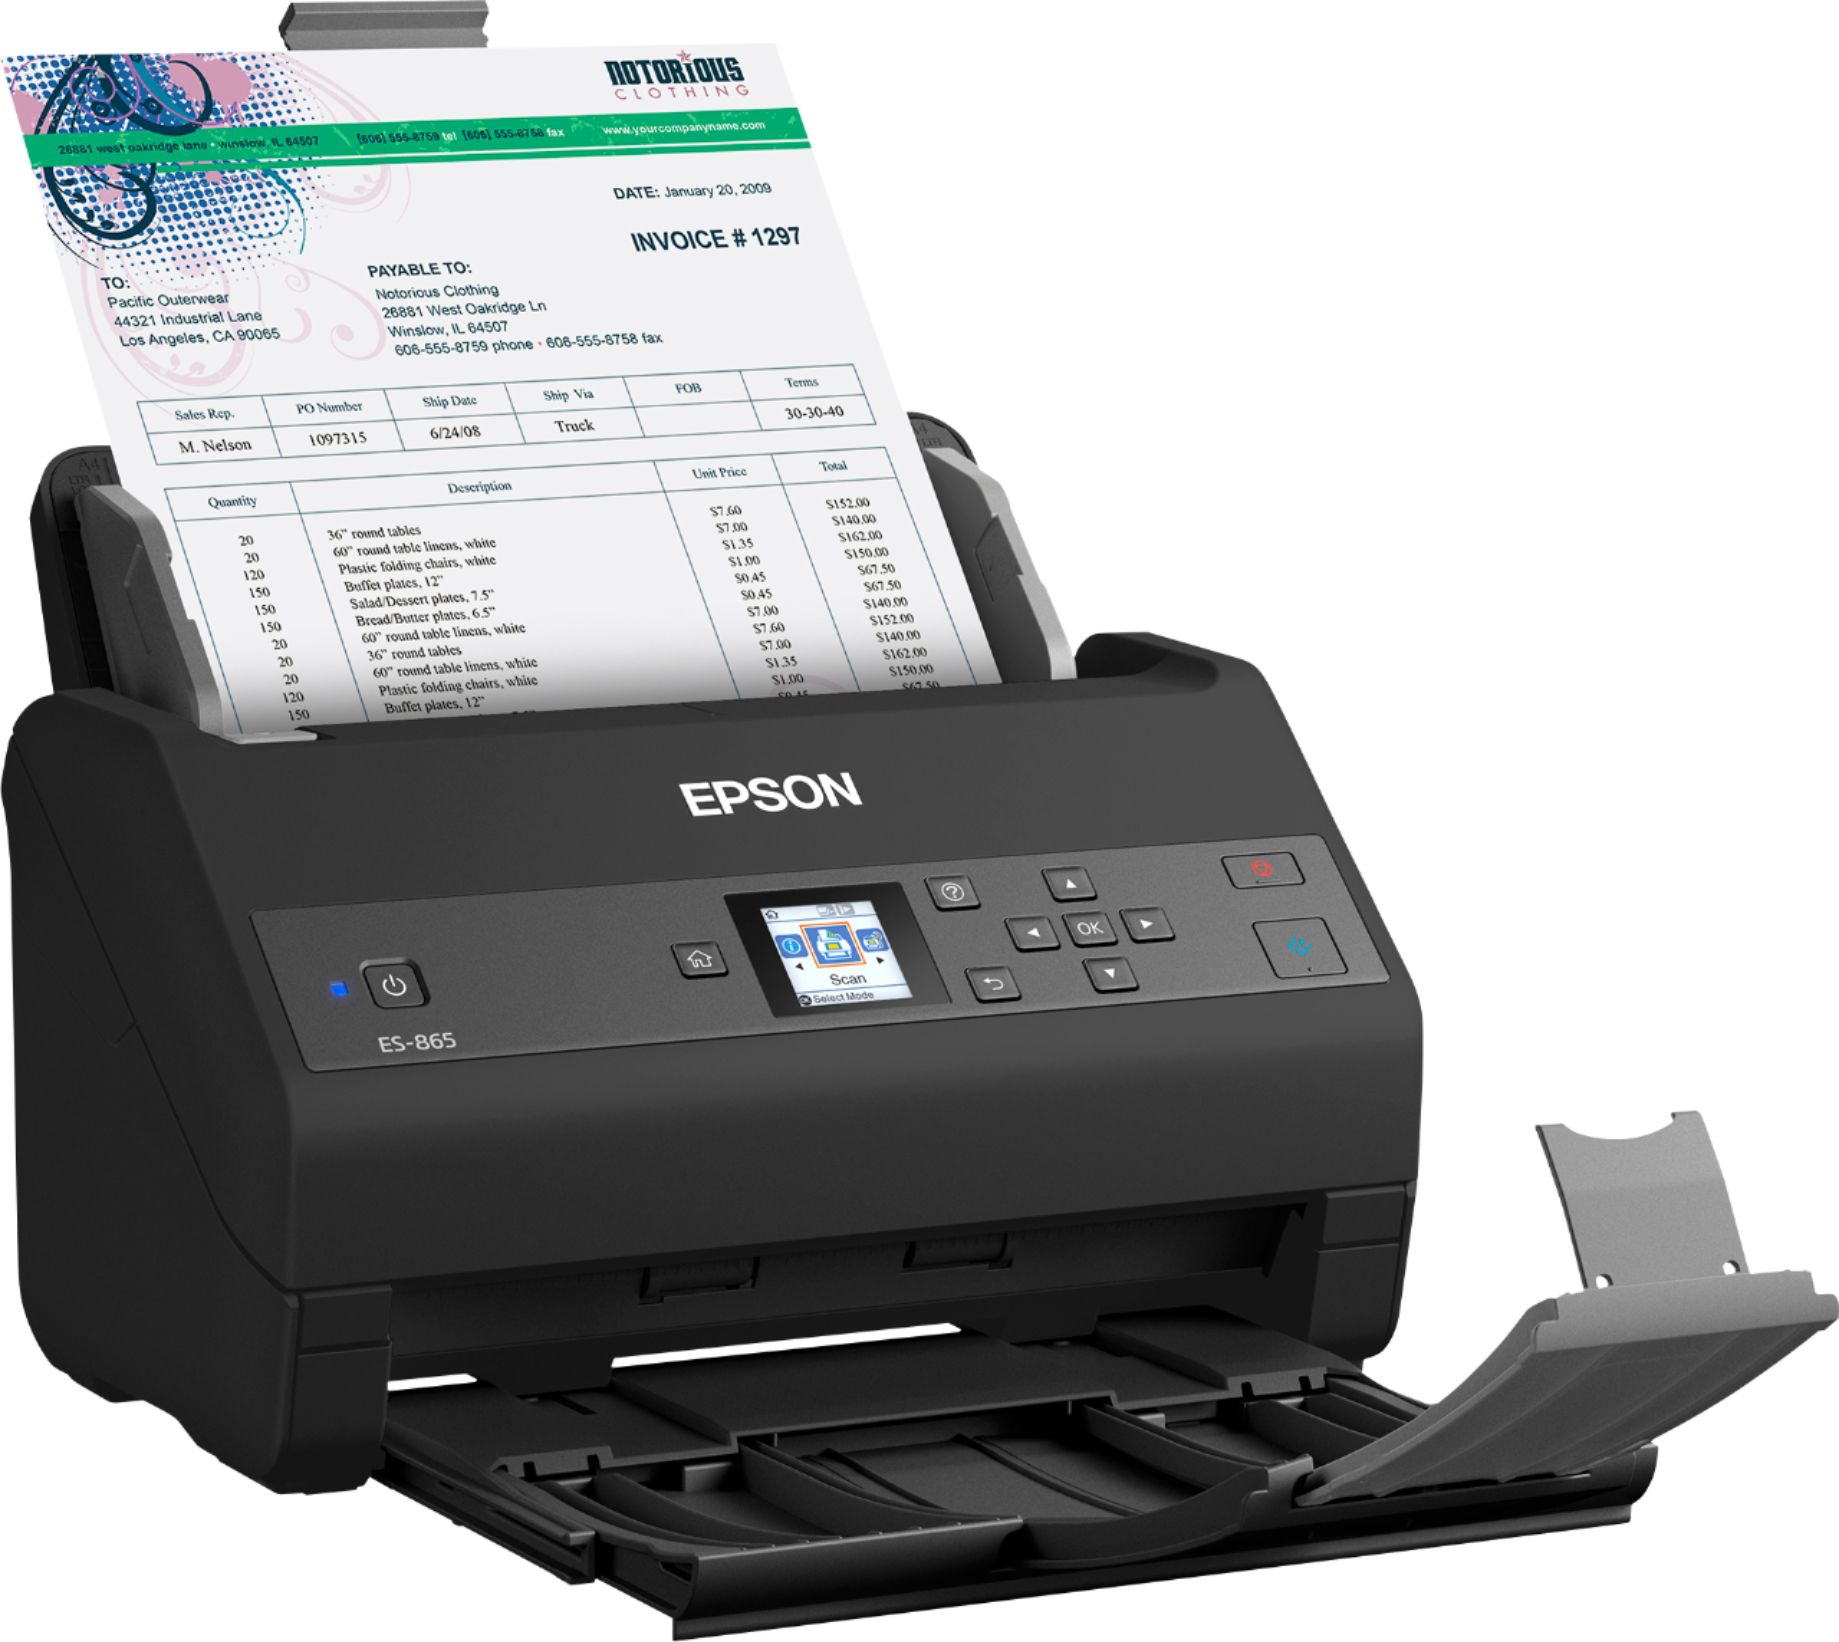 Angle View: Canon imageFORMULA R40 Office Document Scanner